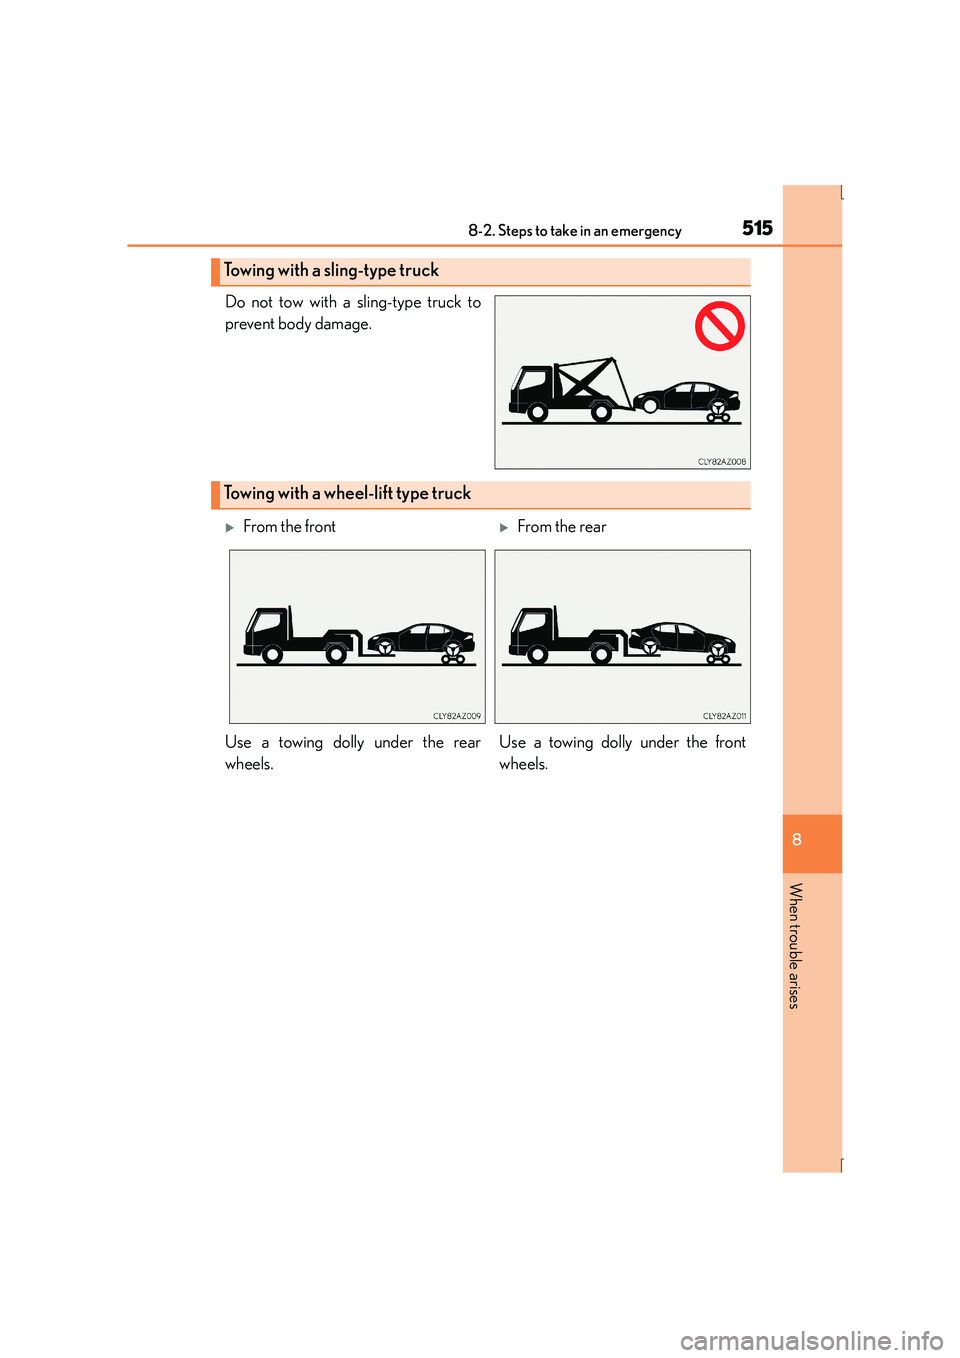 Lexus IS300h 2016  Owners Manual 5158-2. Steps to take in an emergency
8
When trouble arises
IS300h_EE(OM53D56E)
Do not tow with a sling-type truck to
prevent body damage.
Towing with a sling-type truck
Towing with a wheel-lift type 